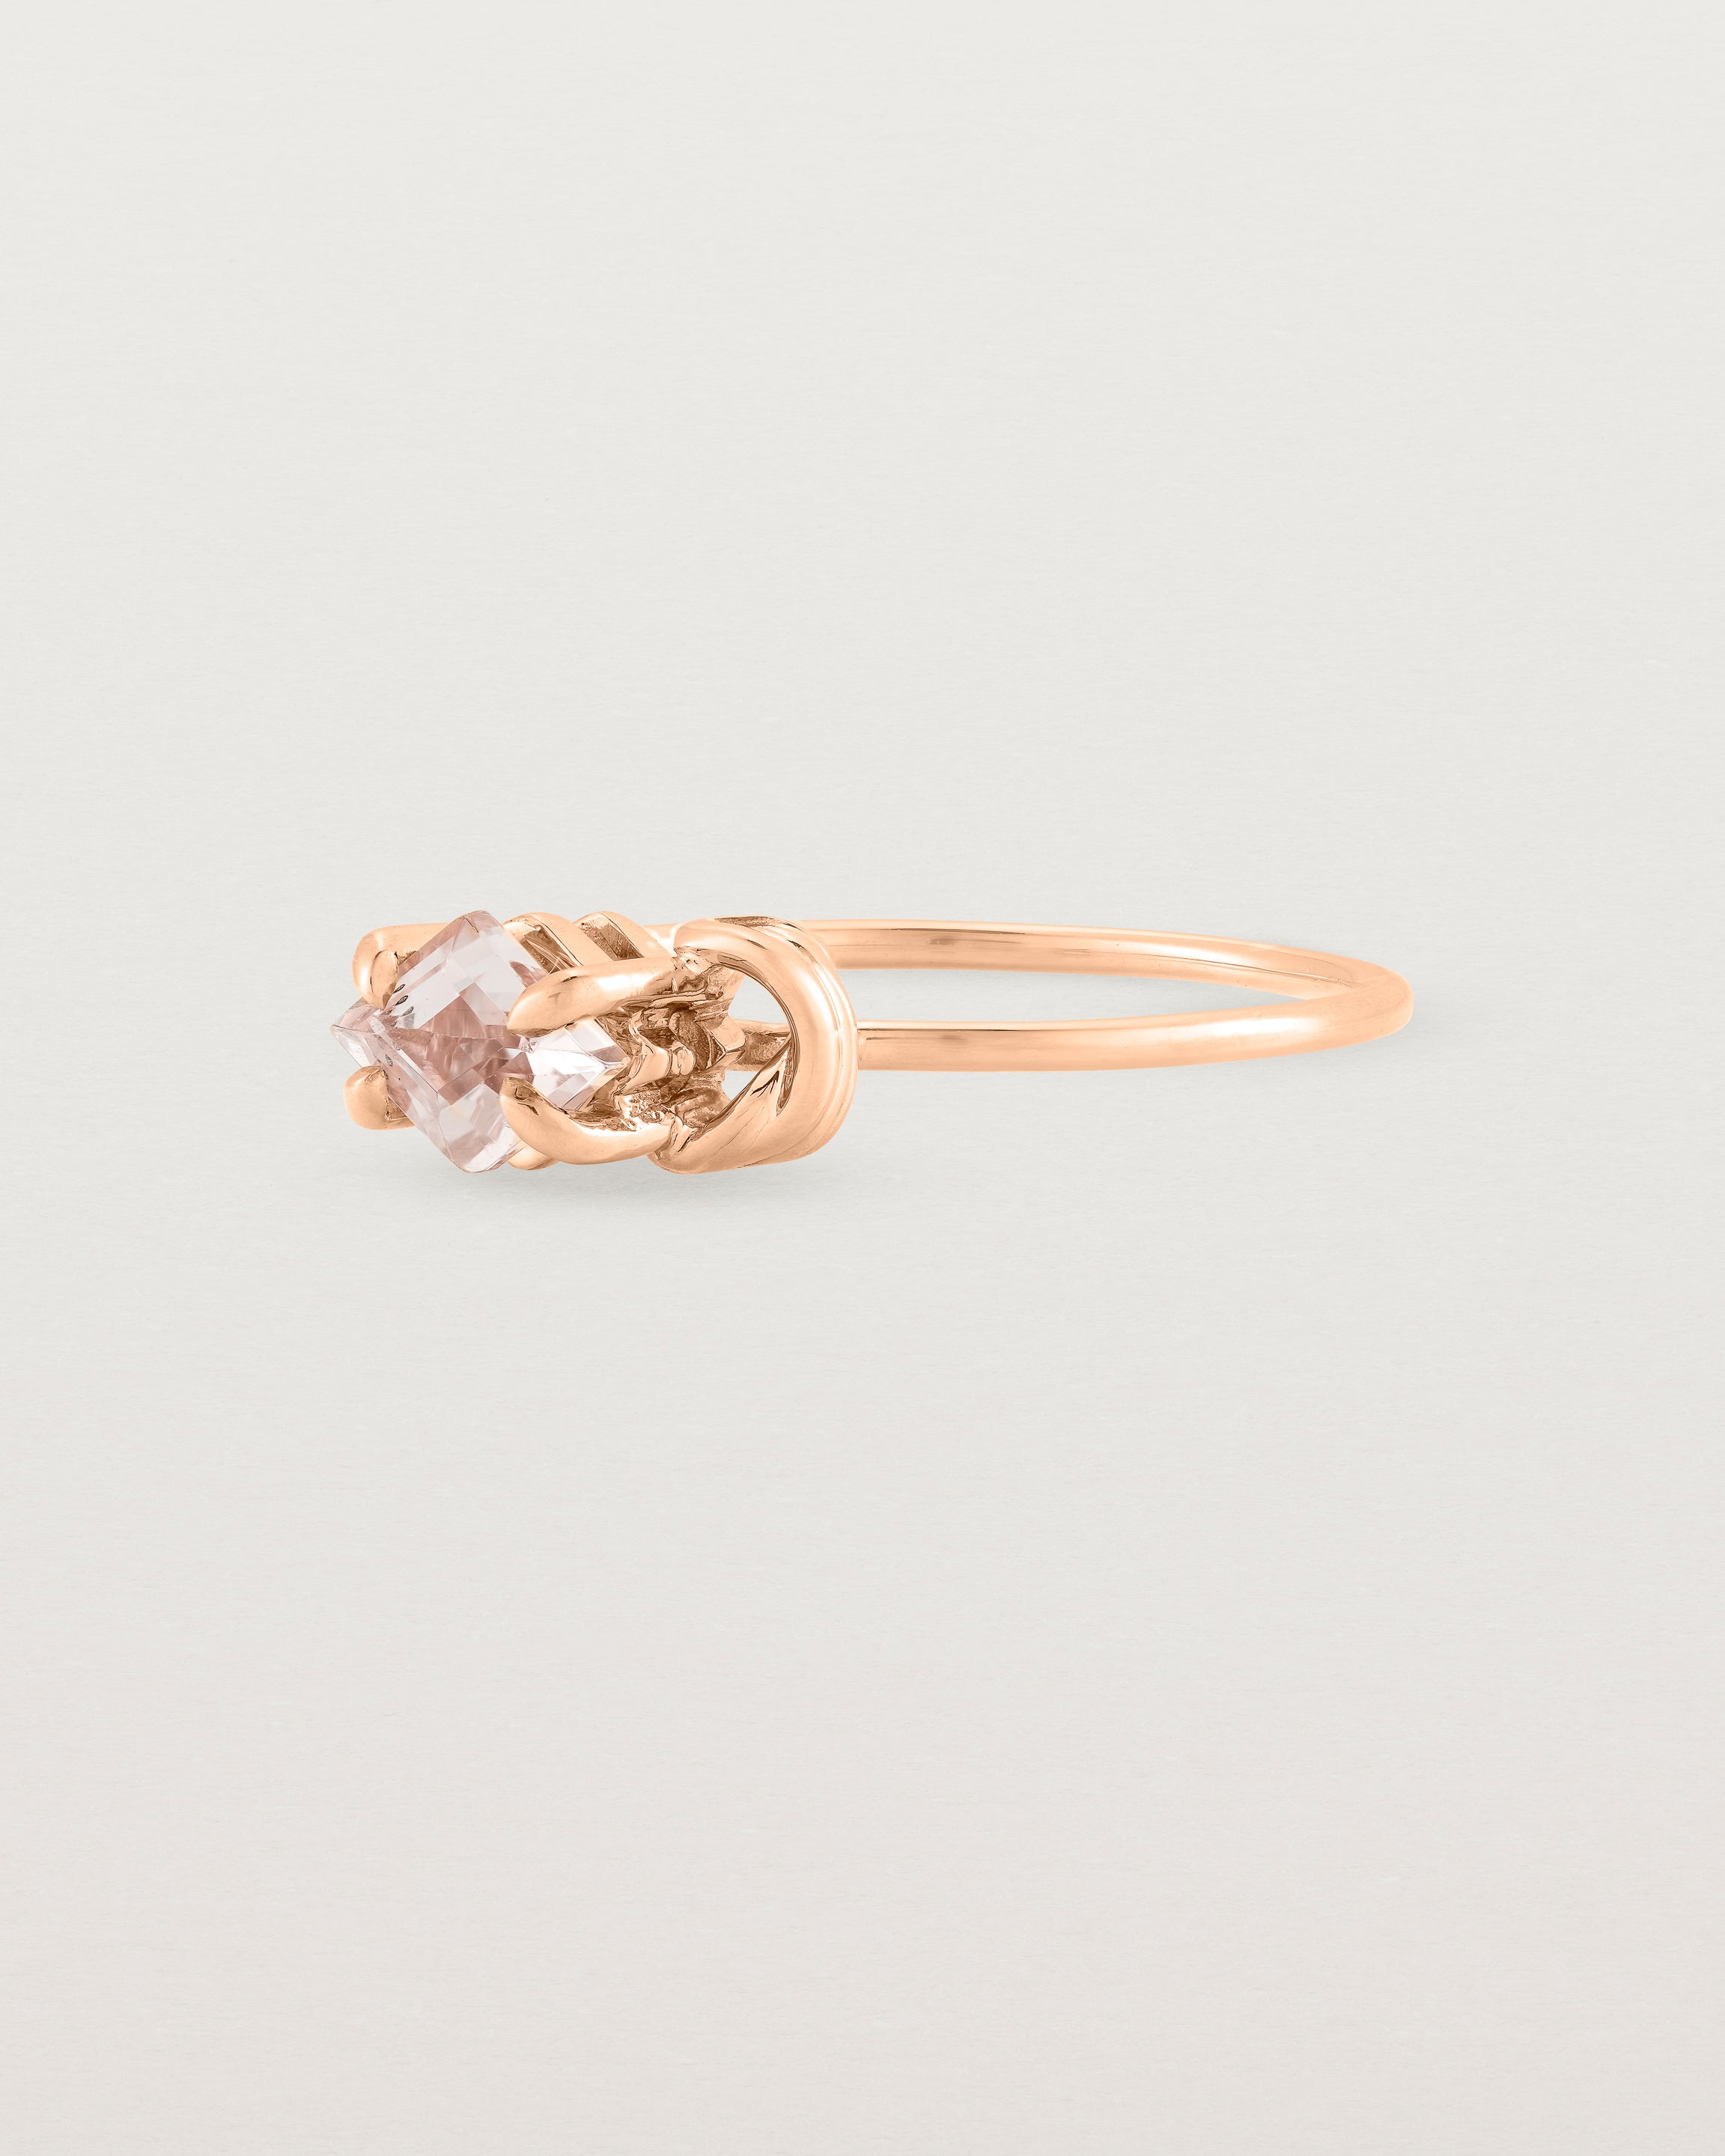 Angled view of the Nuna Ring | Savannah Sunstone in Rose Gold.